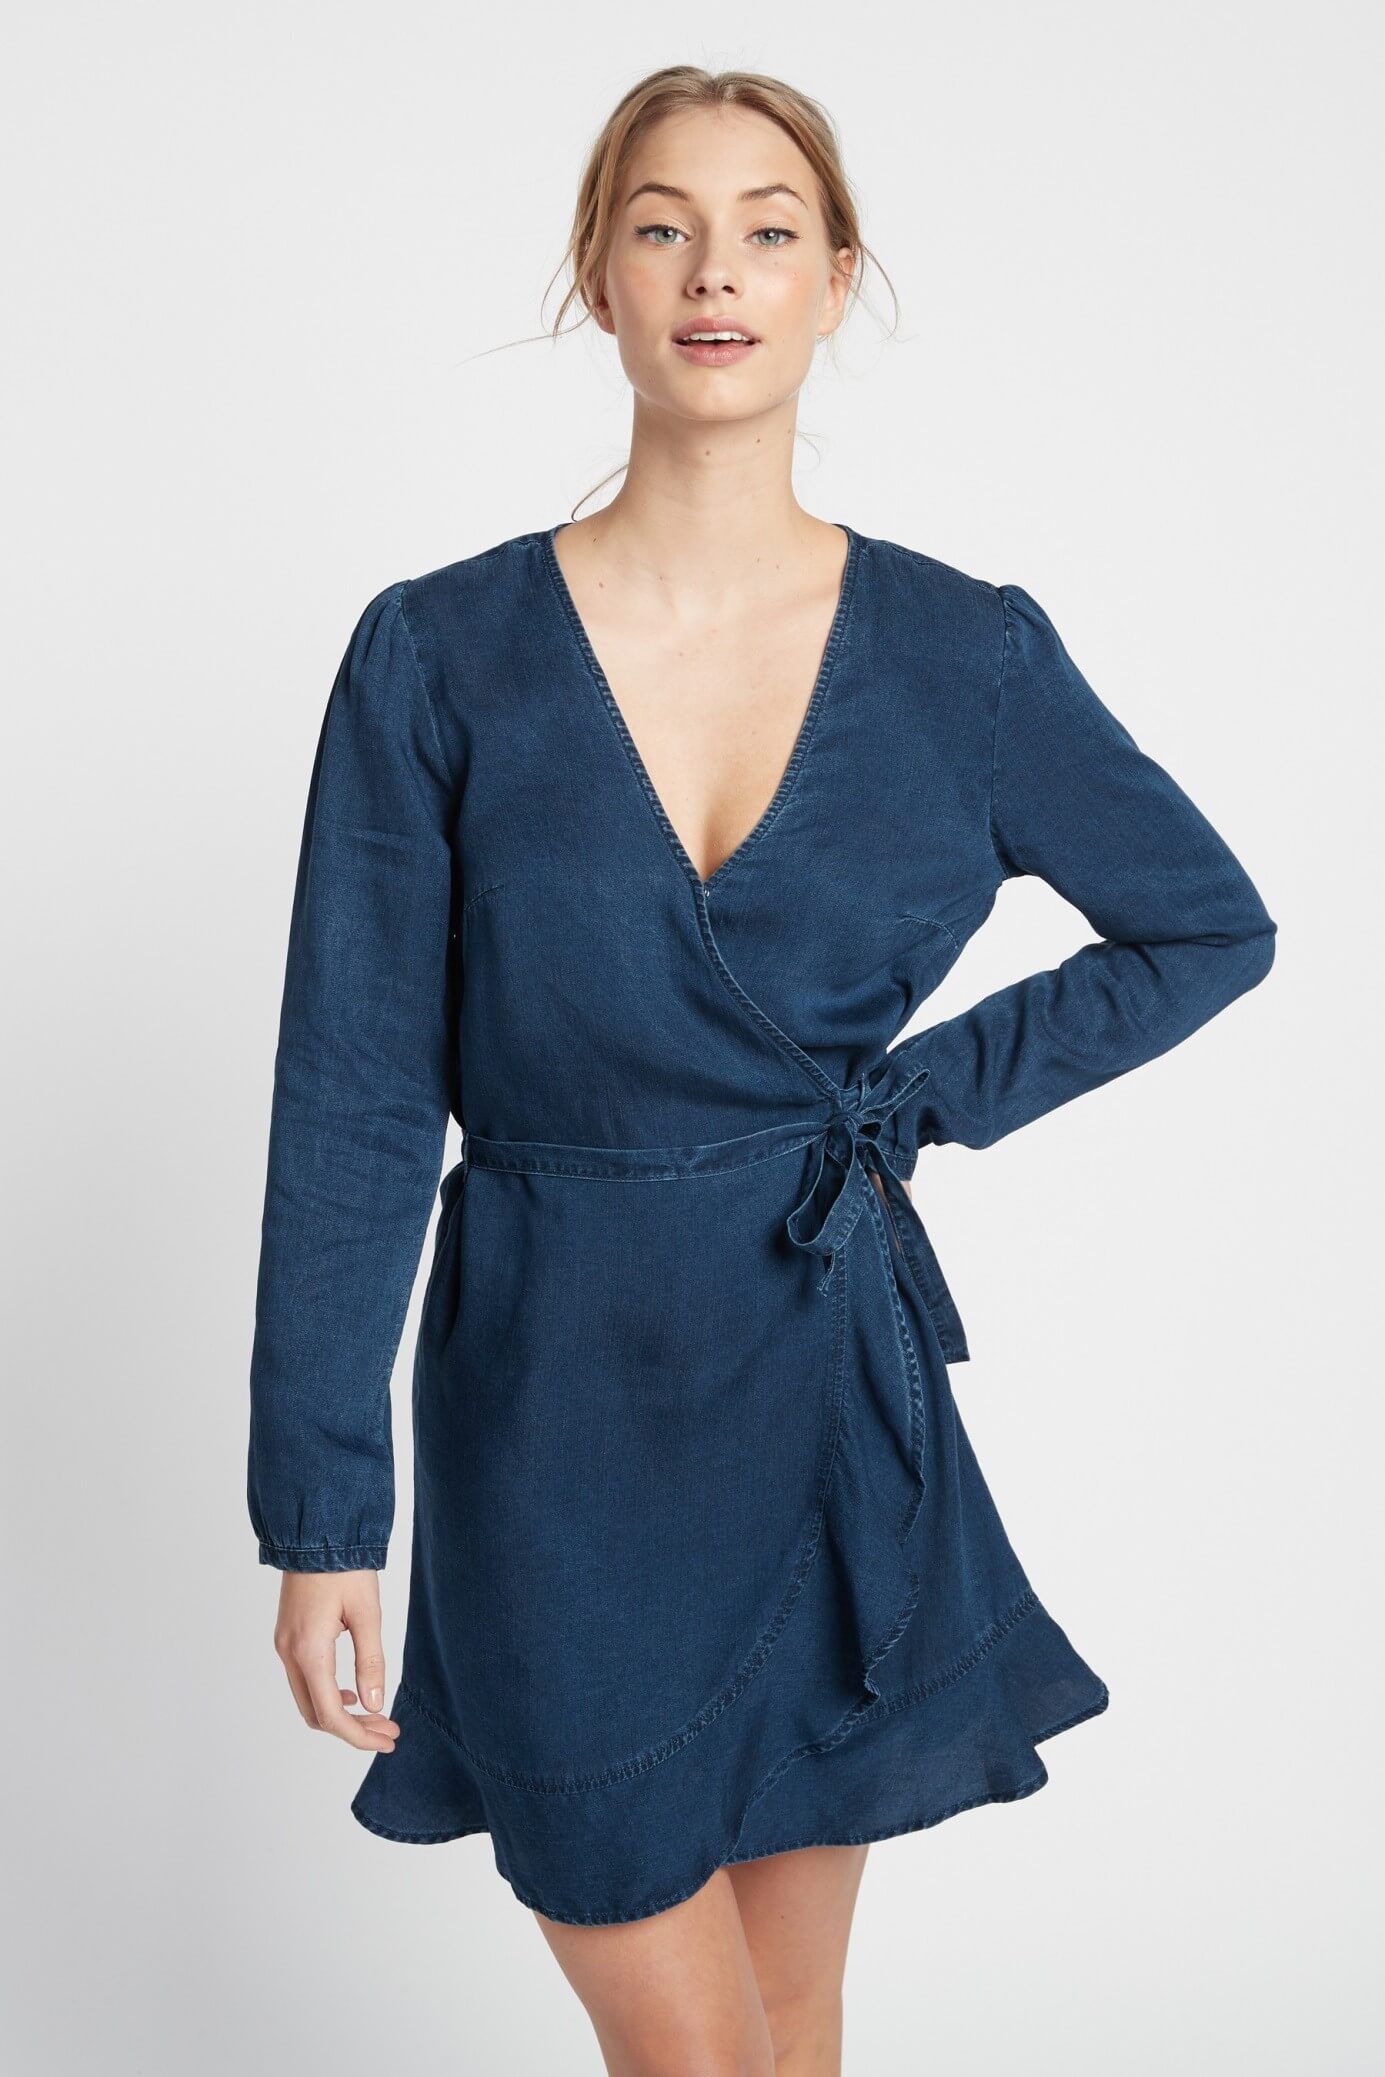 The most suitable denim dress: what to choose?